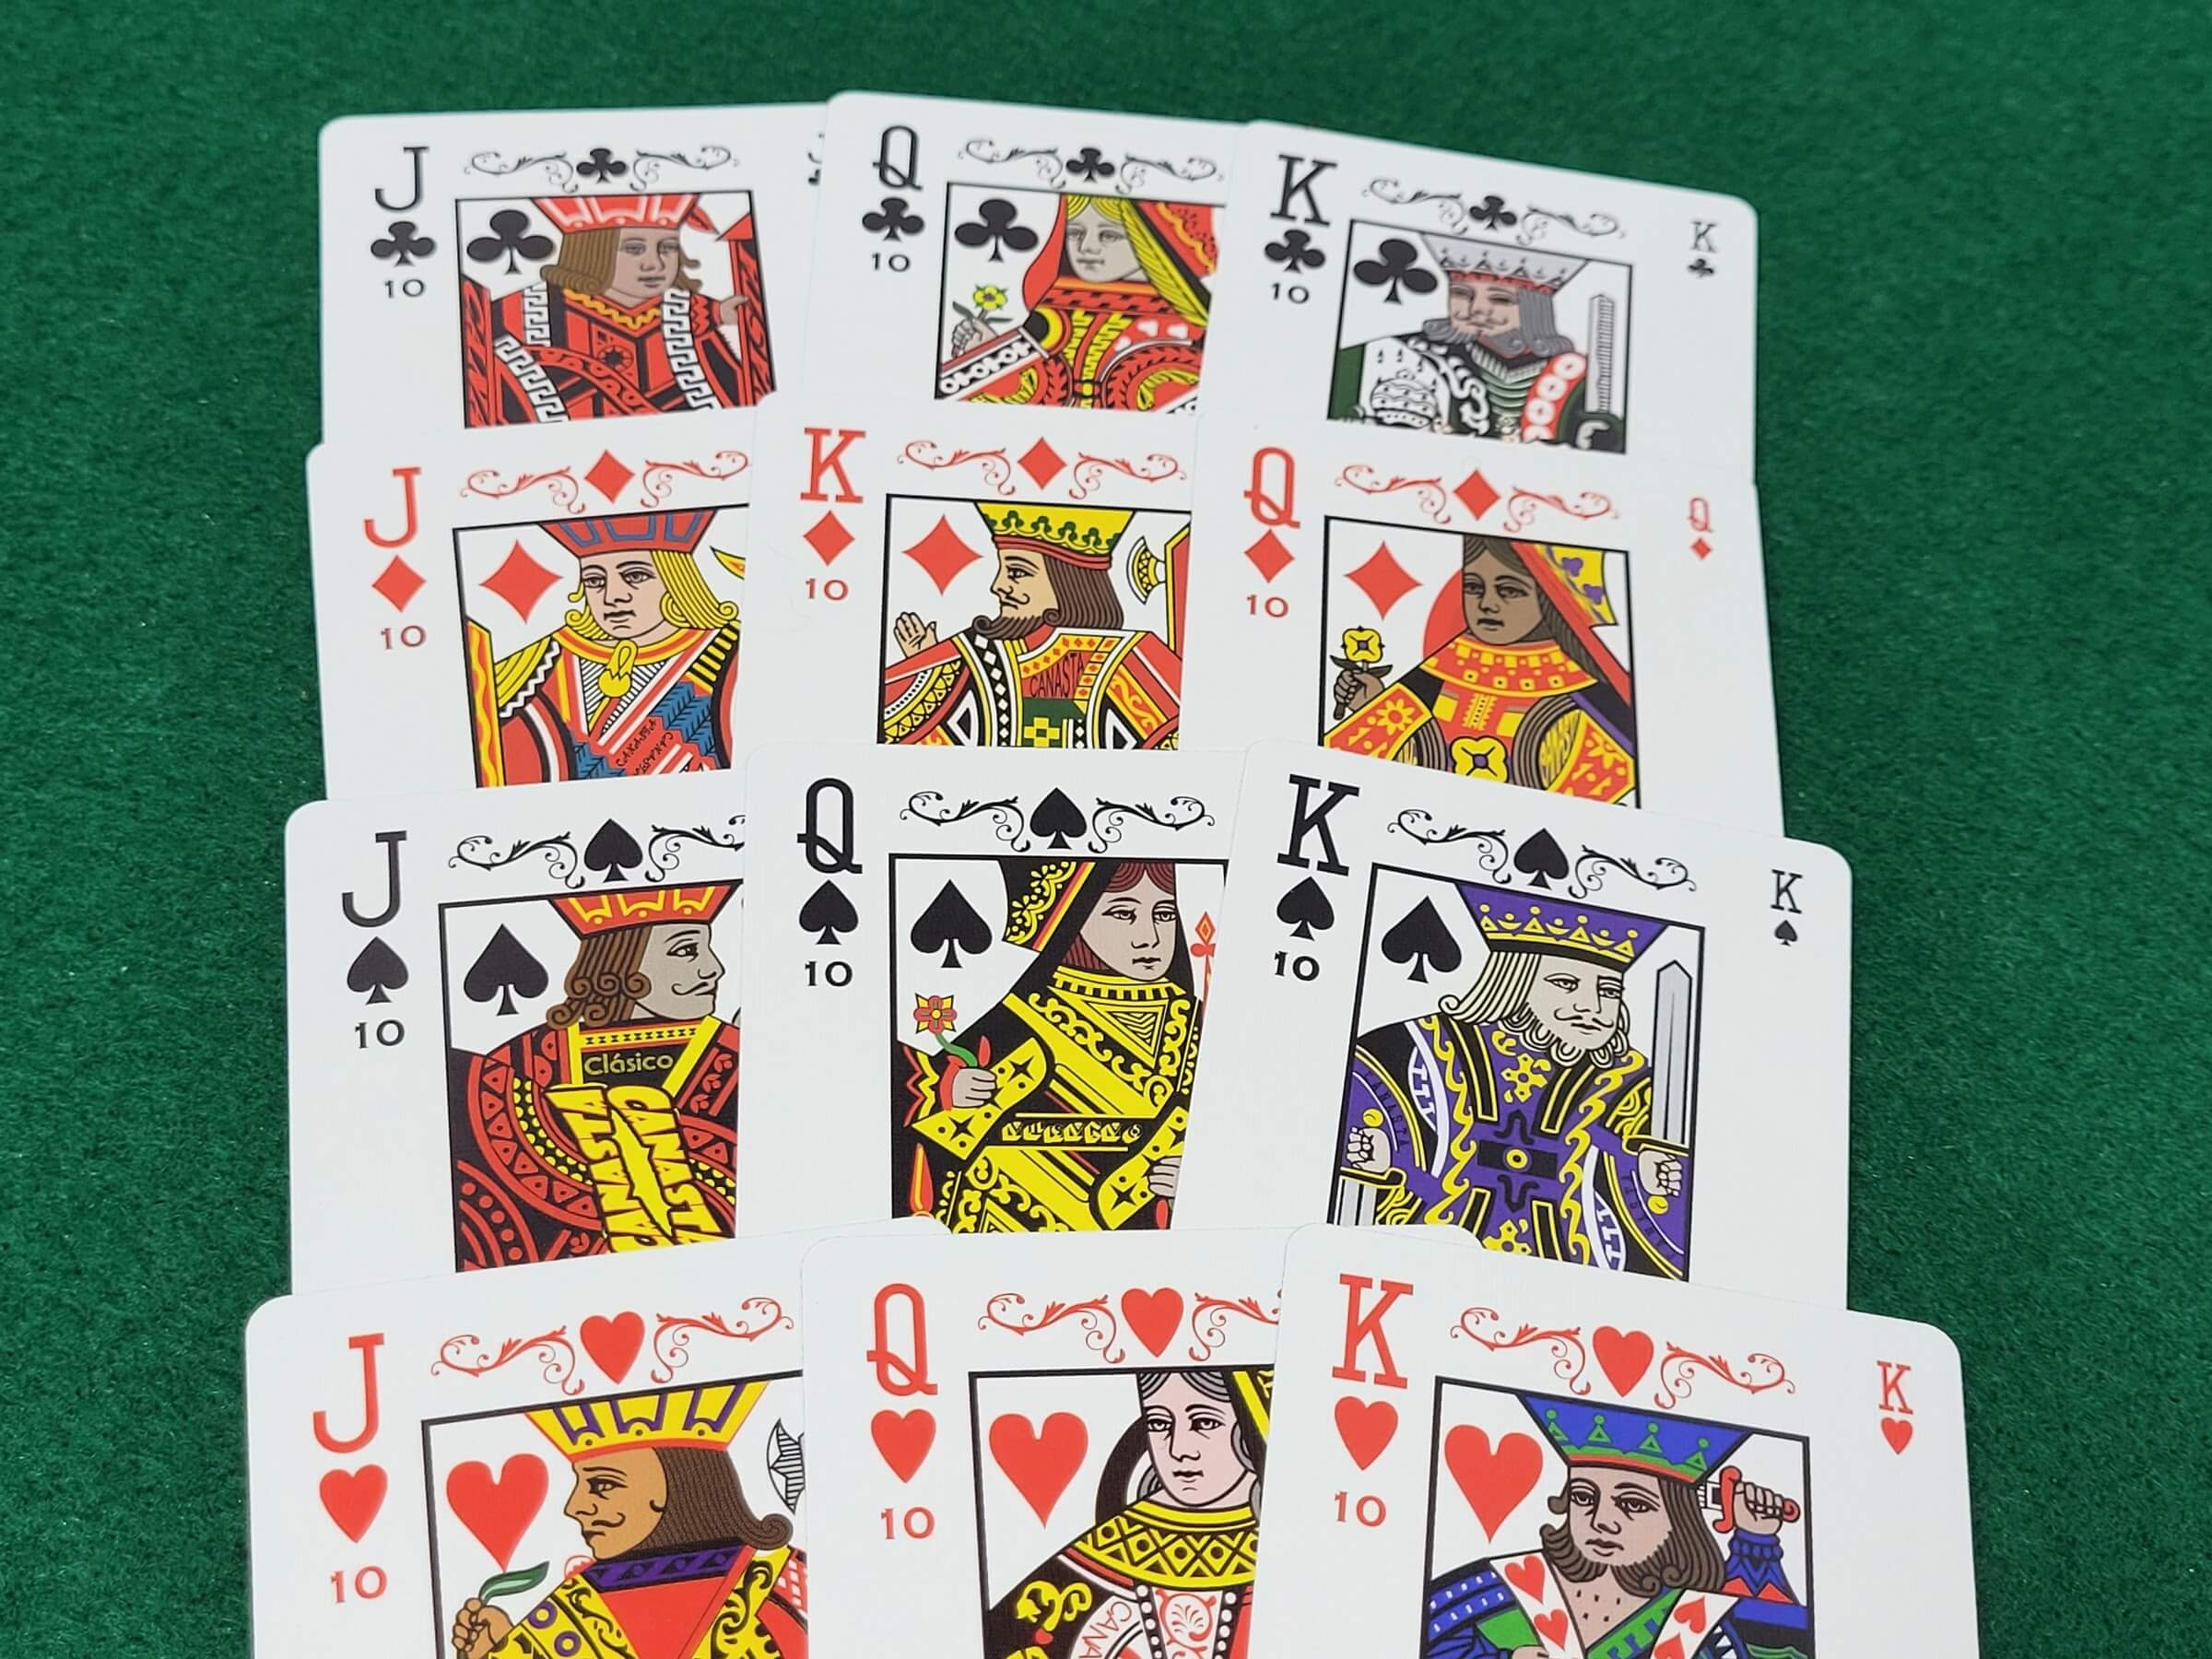 Canasta: rules and variations of the card game